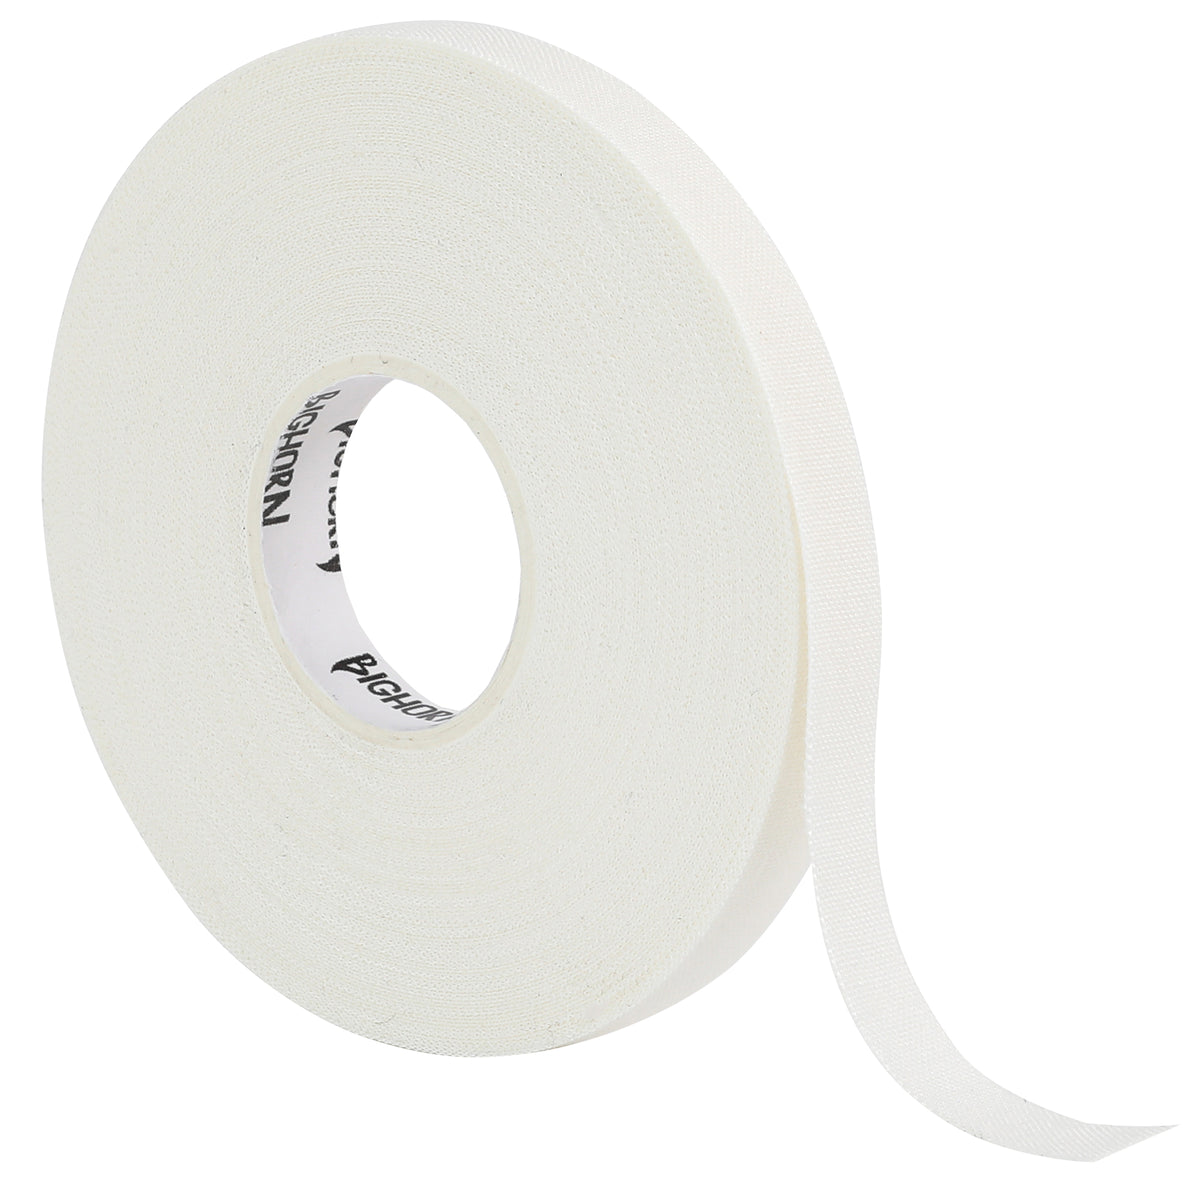 Zonas 1/2 Inch Professional Finger Tape Roll: Ithaca Sports